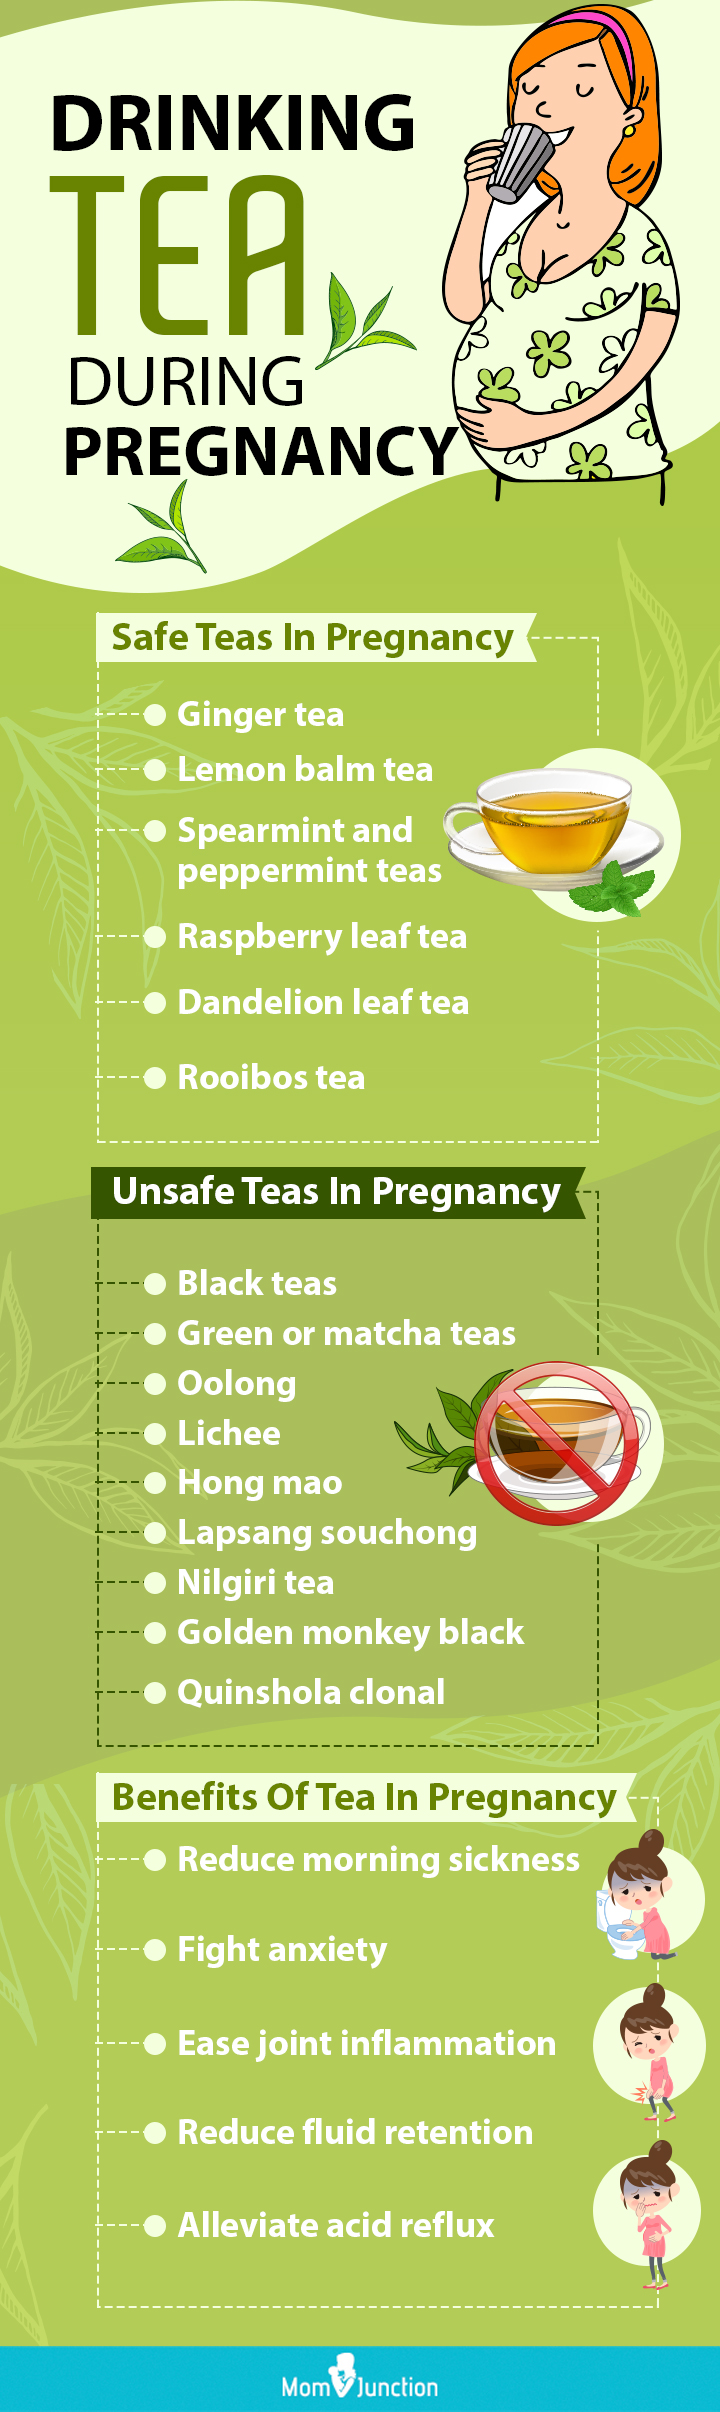 safe unsafe teas during in pregnancy (Infographic)